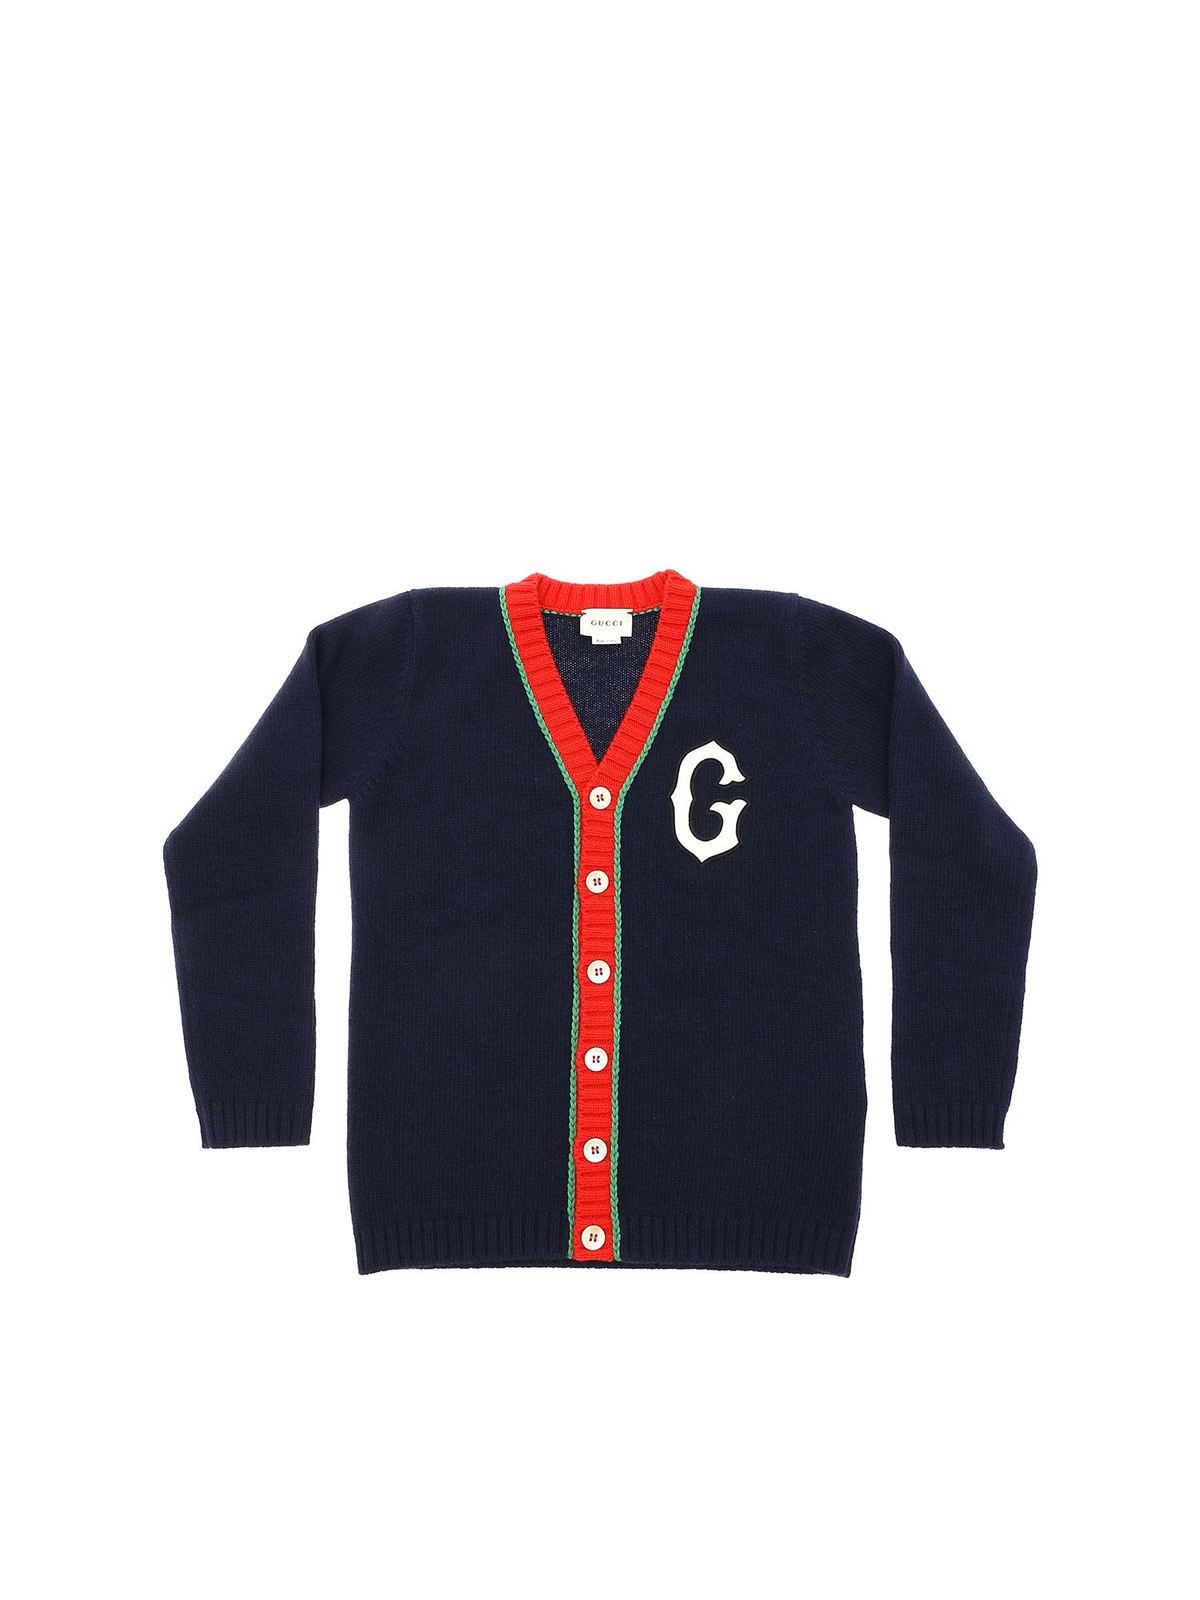 GUCCI BLUE CARDIGAN WITH WHITE G